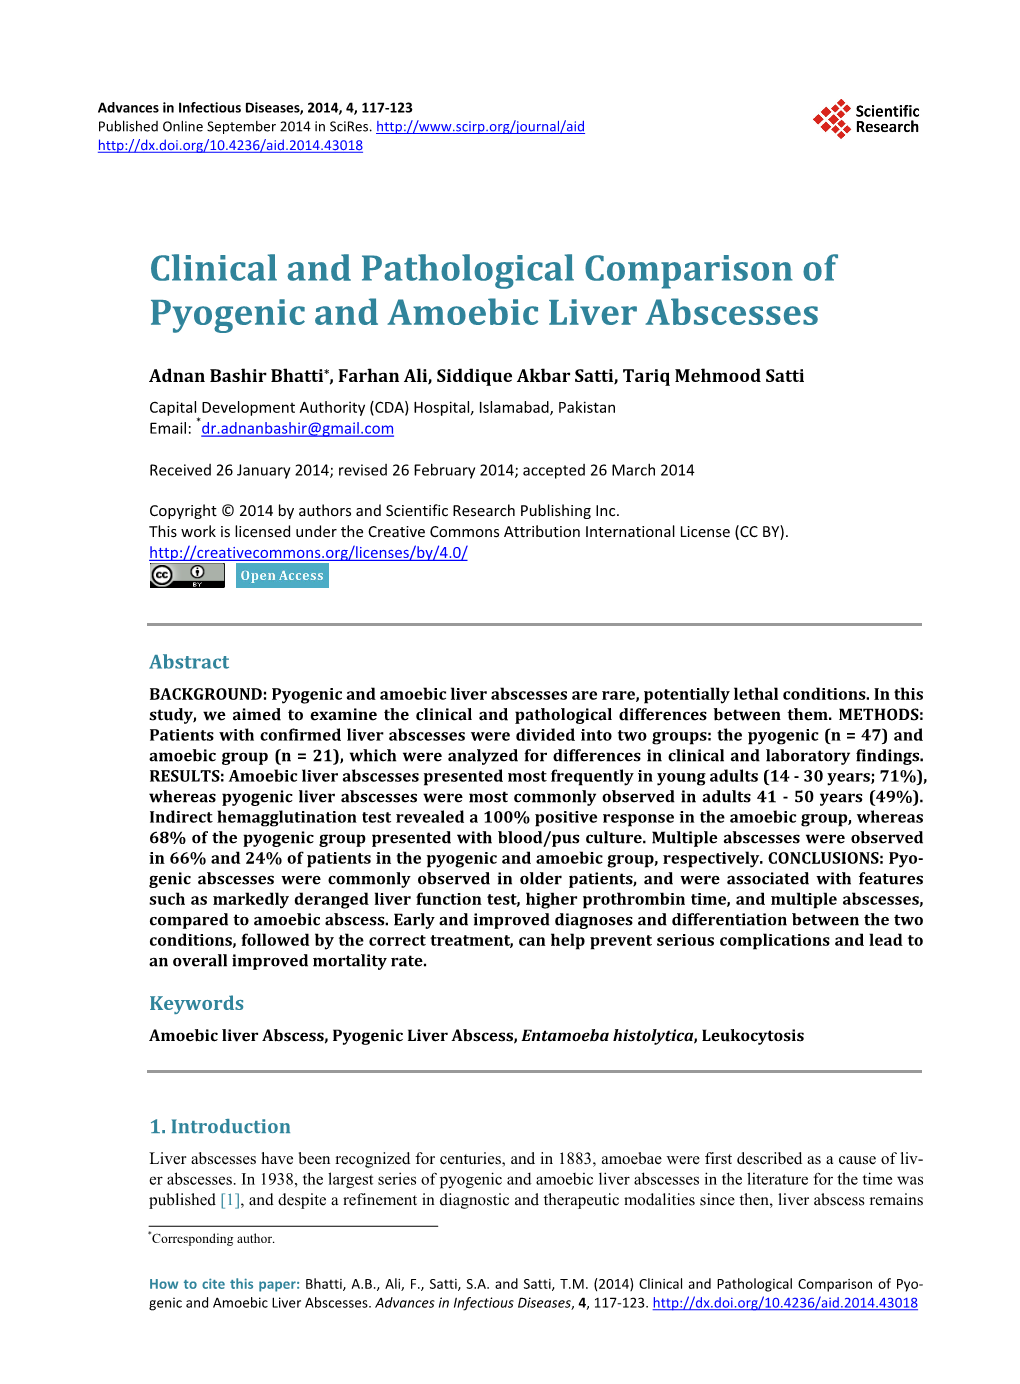 Clinical and Pathological Comparison of Pyogenic and Amoebic Liver Abscesses